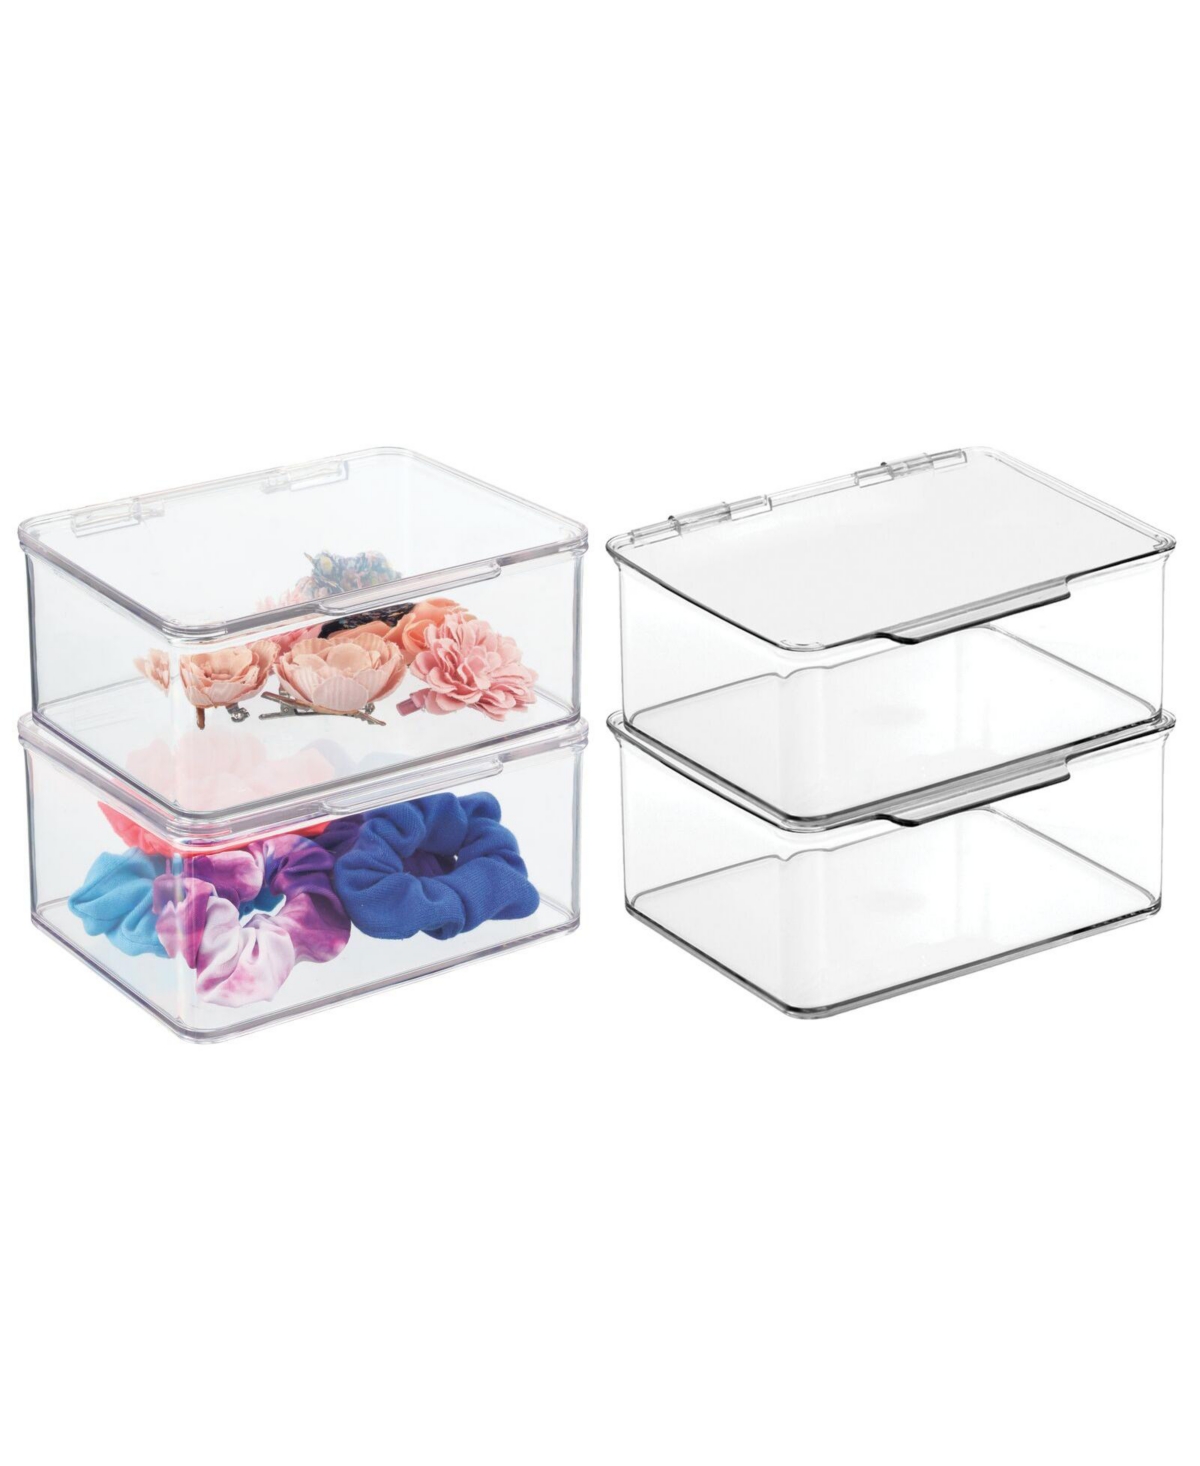 Plastic Cosmetic Vanity Storage Organizer Box with Hinged Lid - 4 Pack - Clear